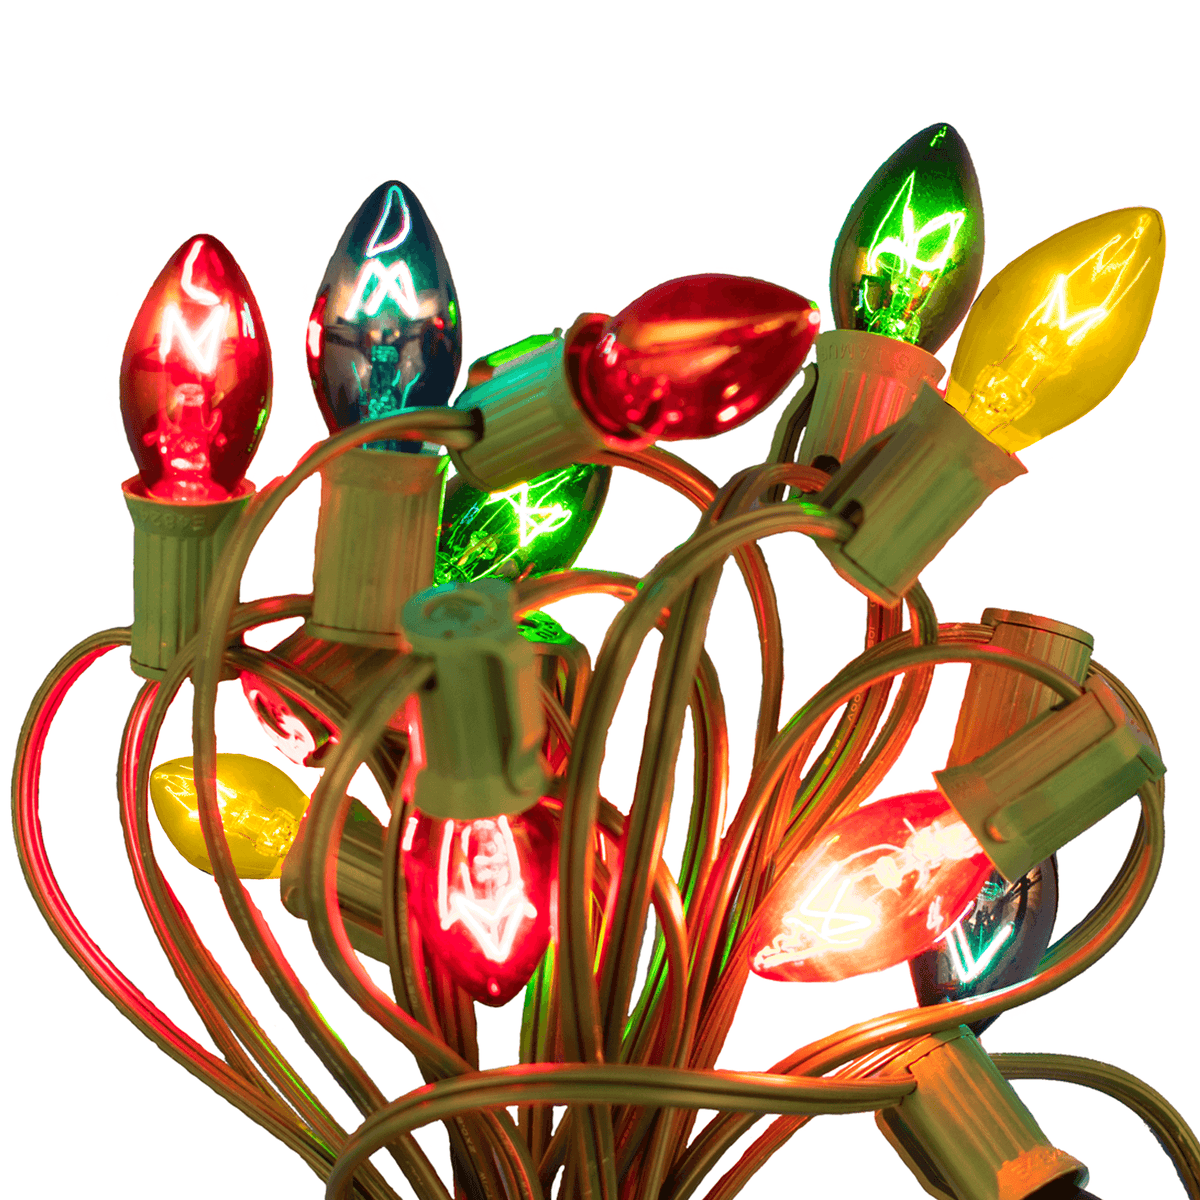 Christmas Lights sold with a 25FT Magnetic Patio String Cord in a set!    Get 25 Transparent Red, Green, Blue, Orange, & Yellow Incandescent Light Bulbs with a 25FT Green Patio String Cord.